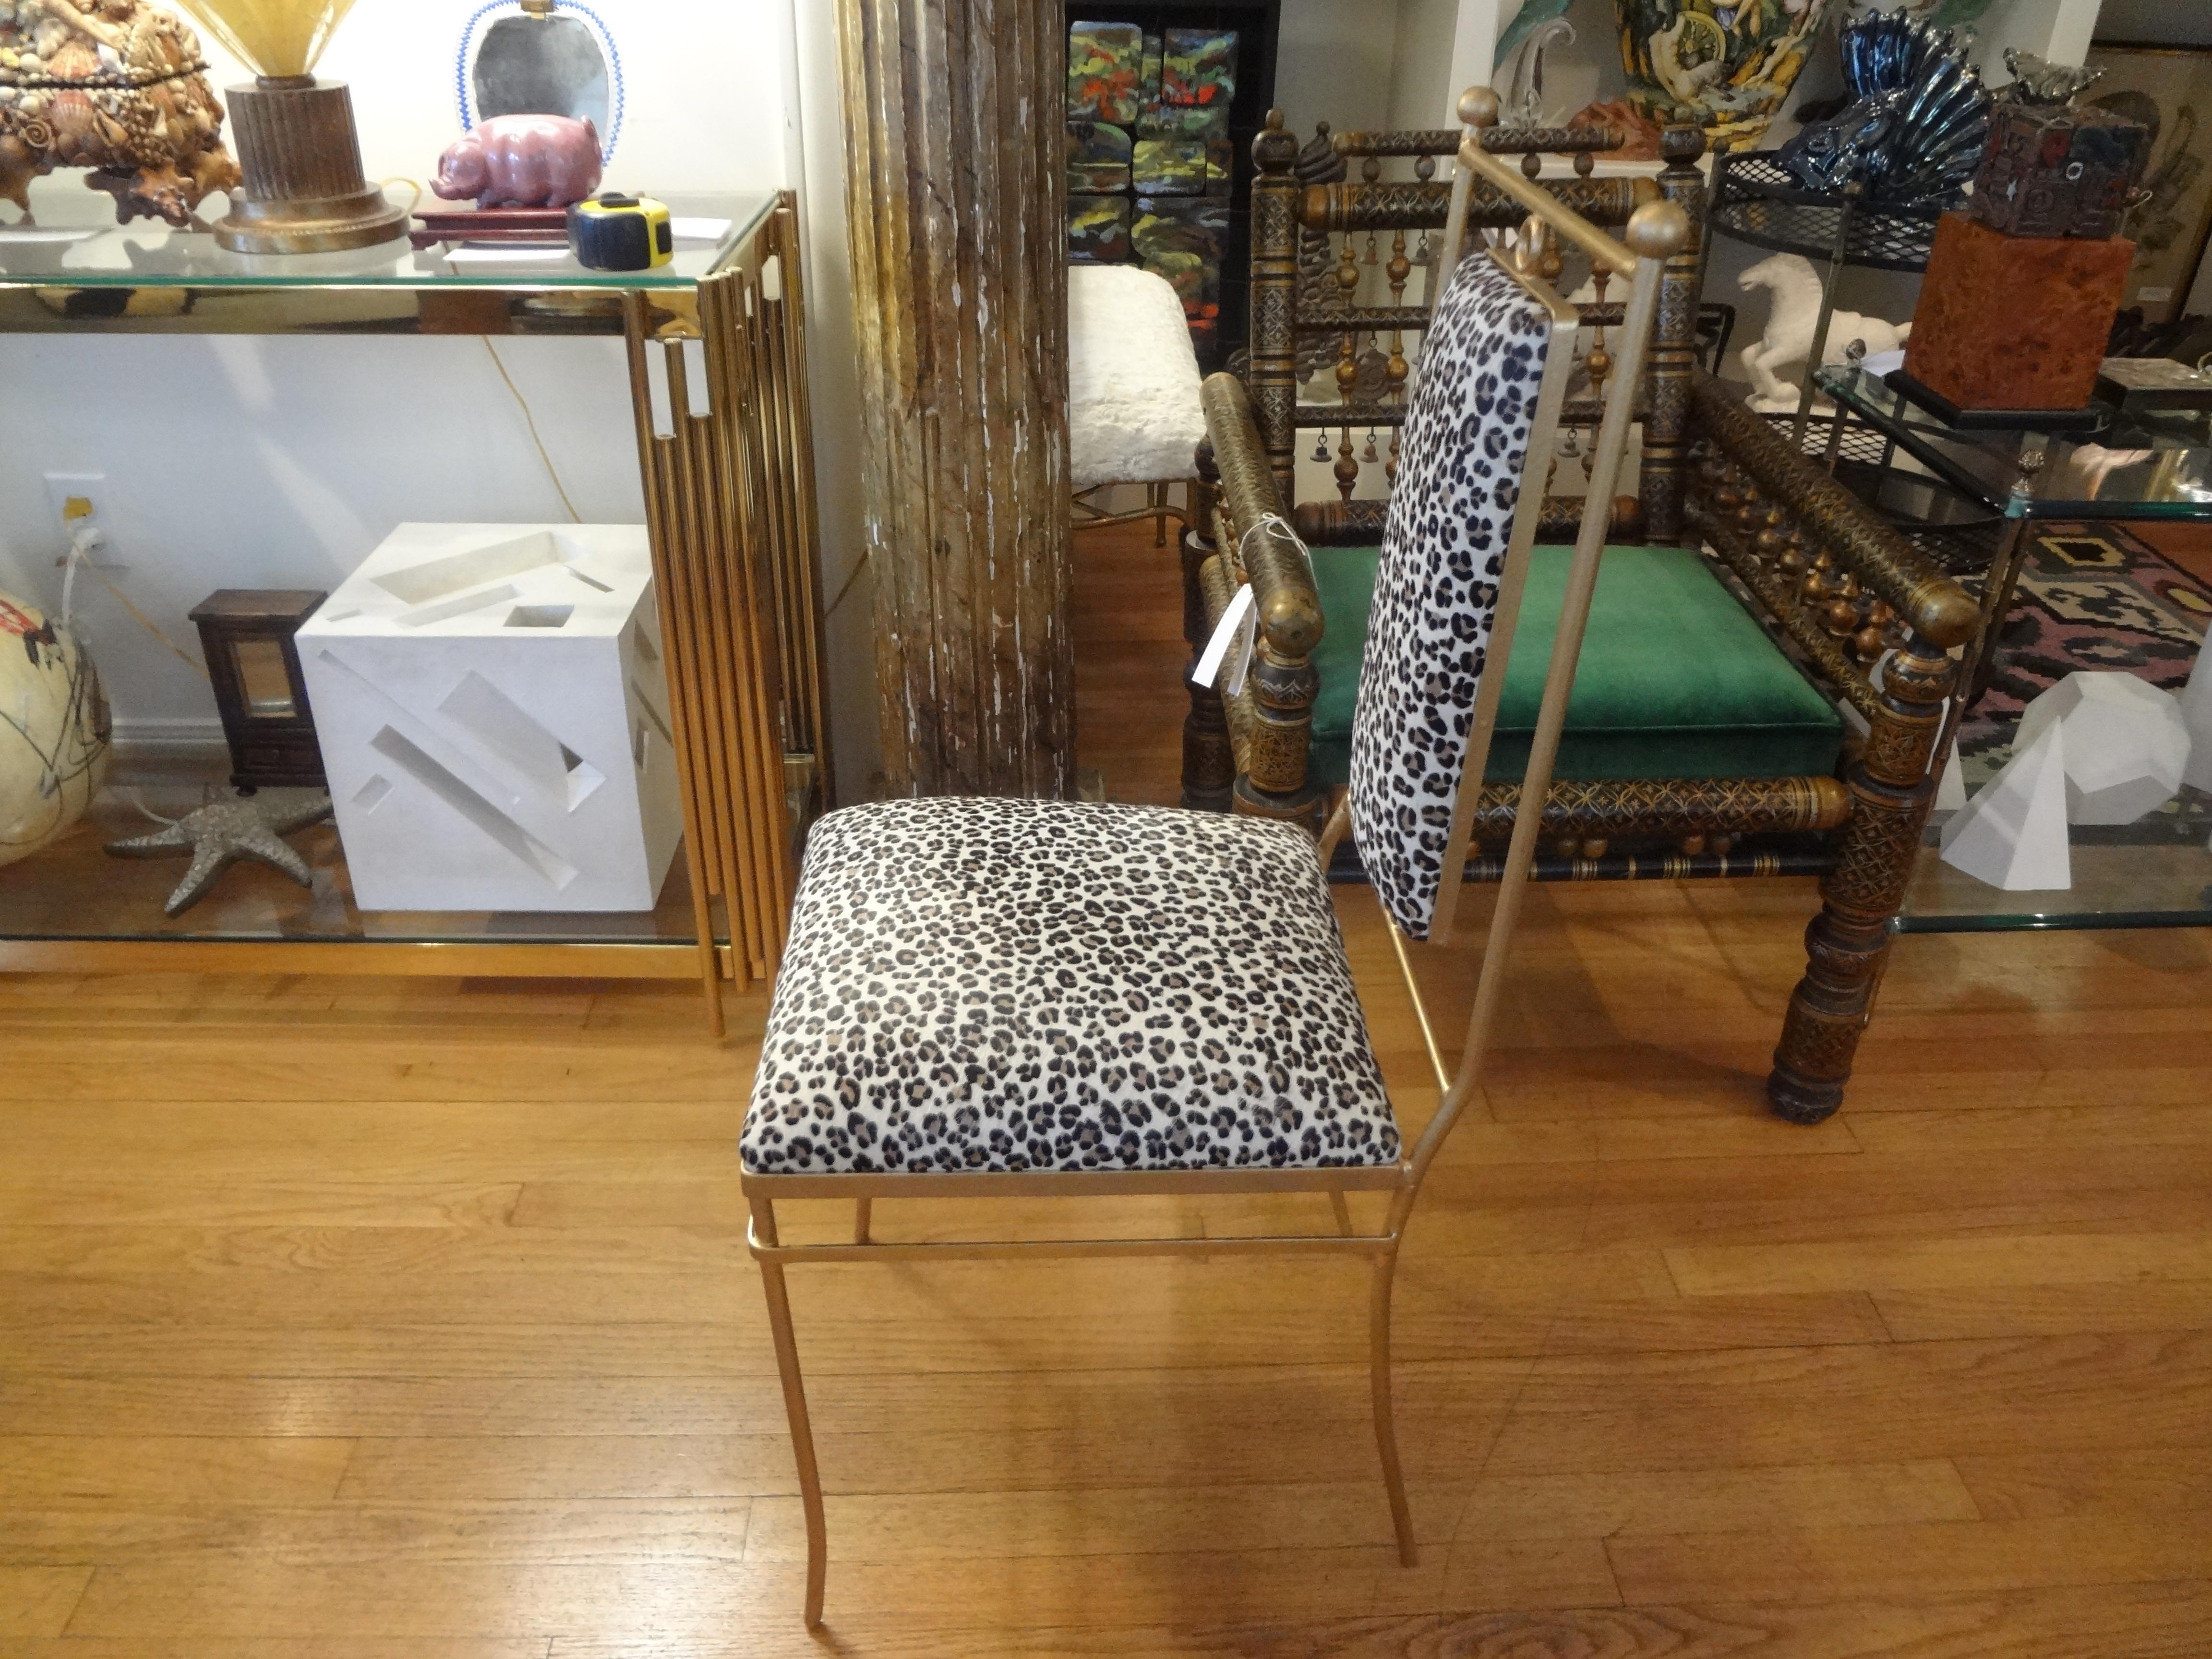 Mid-20th Century Italian Gilt Iron Chair with Leopard Print Hide Upholstery, Gio Ponti Inspired